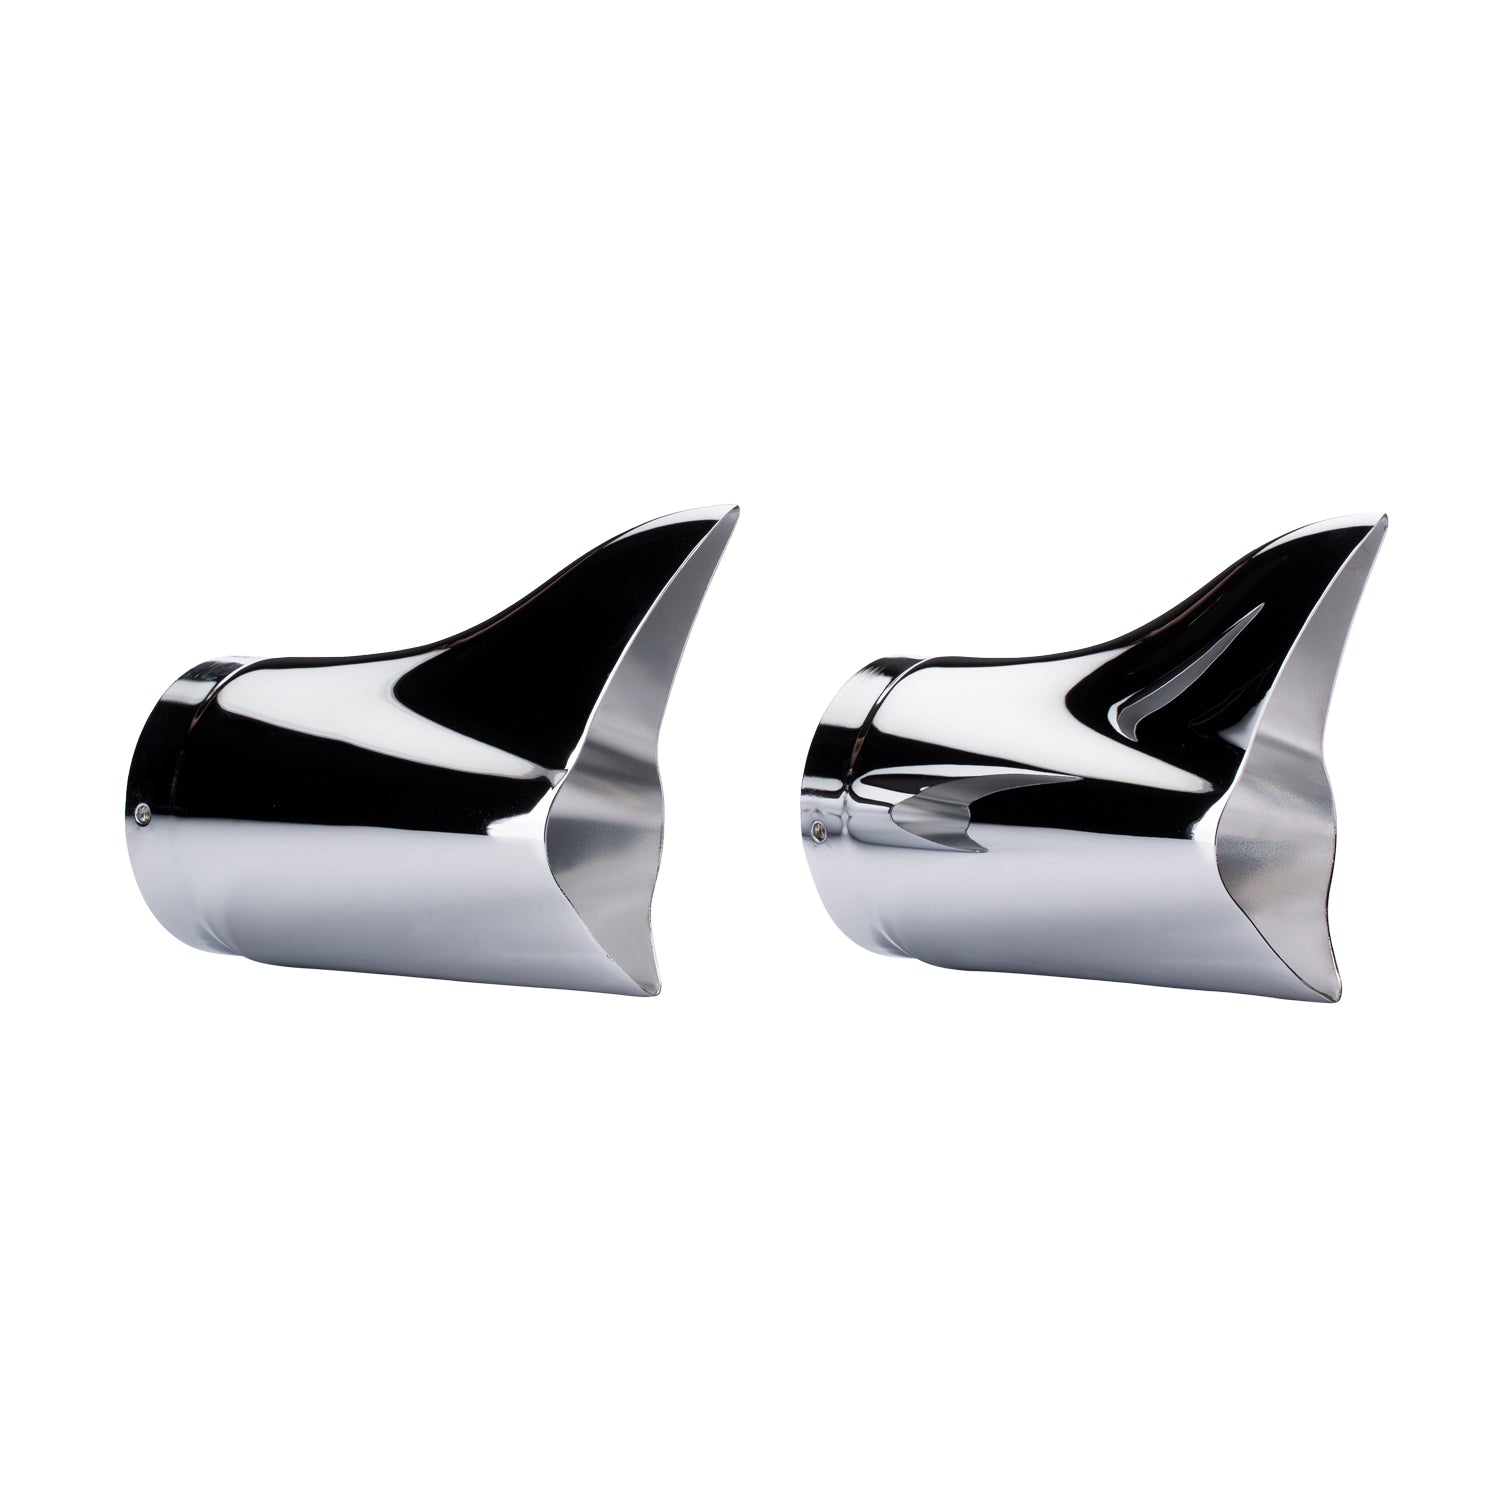 Fish Tail Exhaust Tips in Chrome, Pair